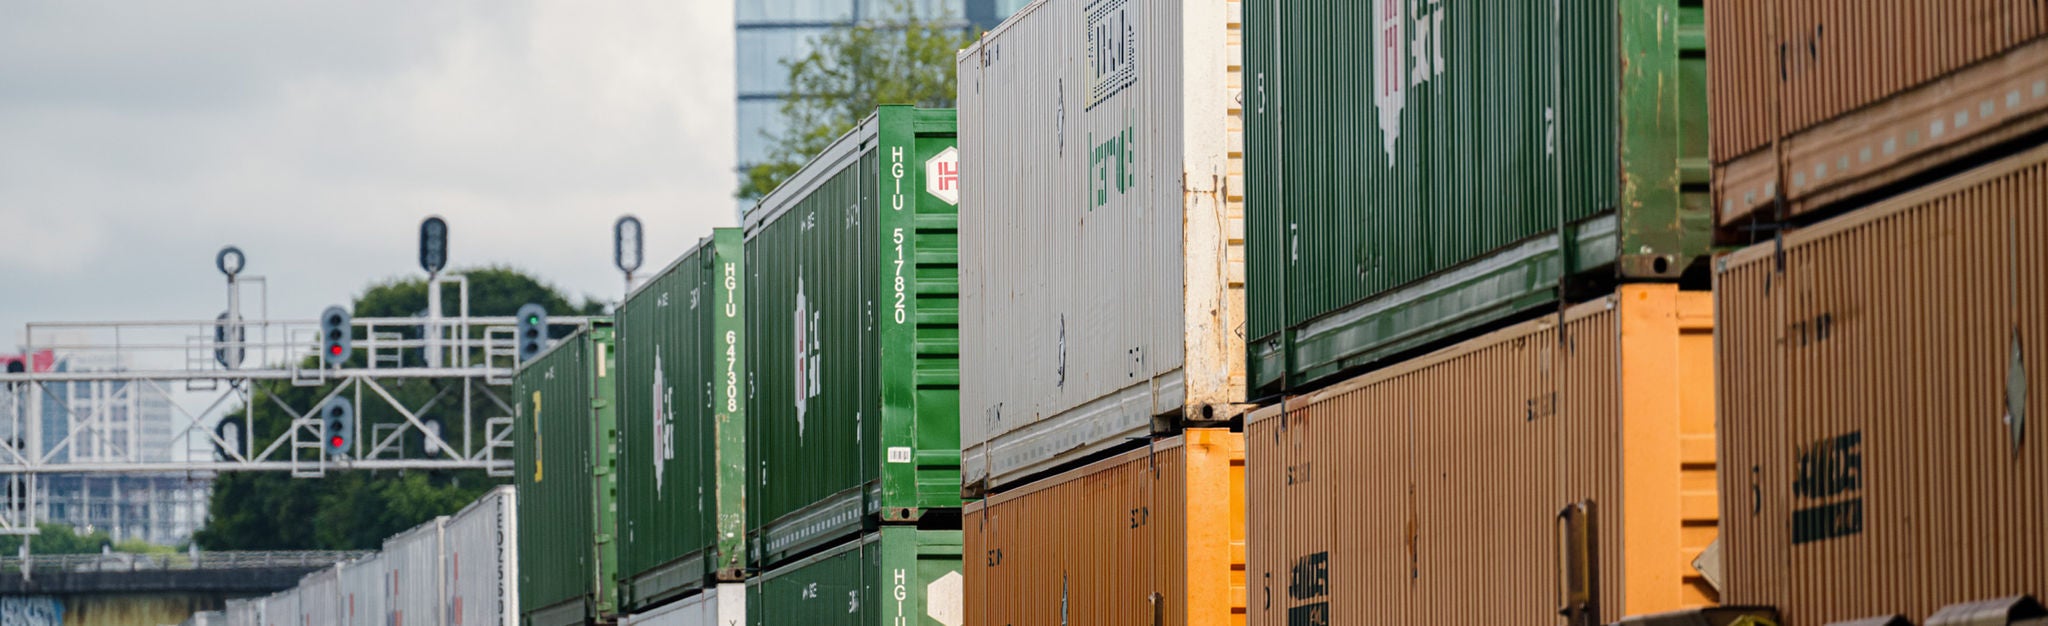 customers-freight-moves-intermodal-containers-through a city